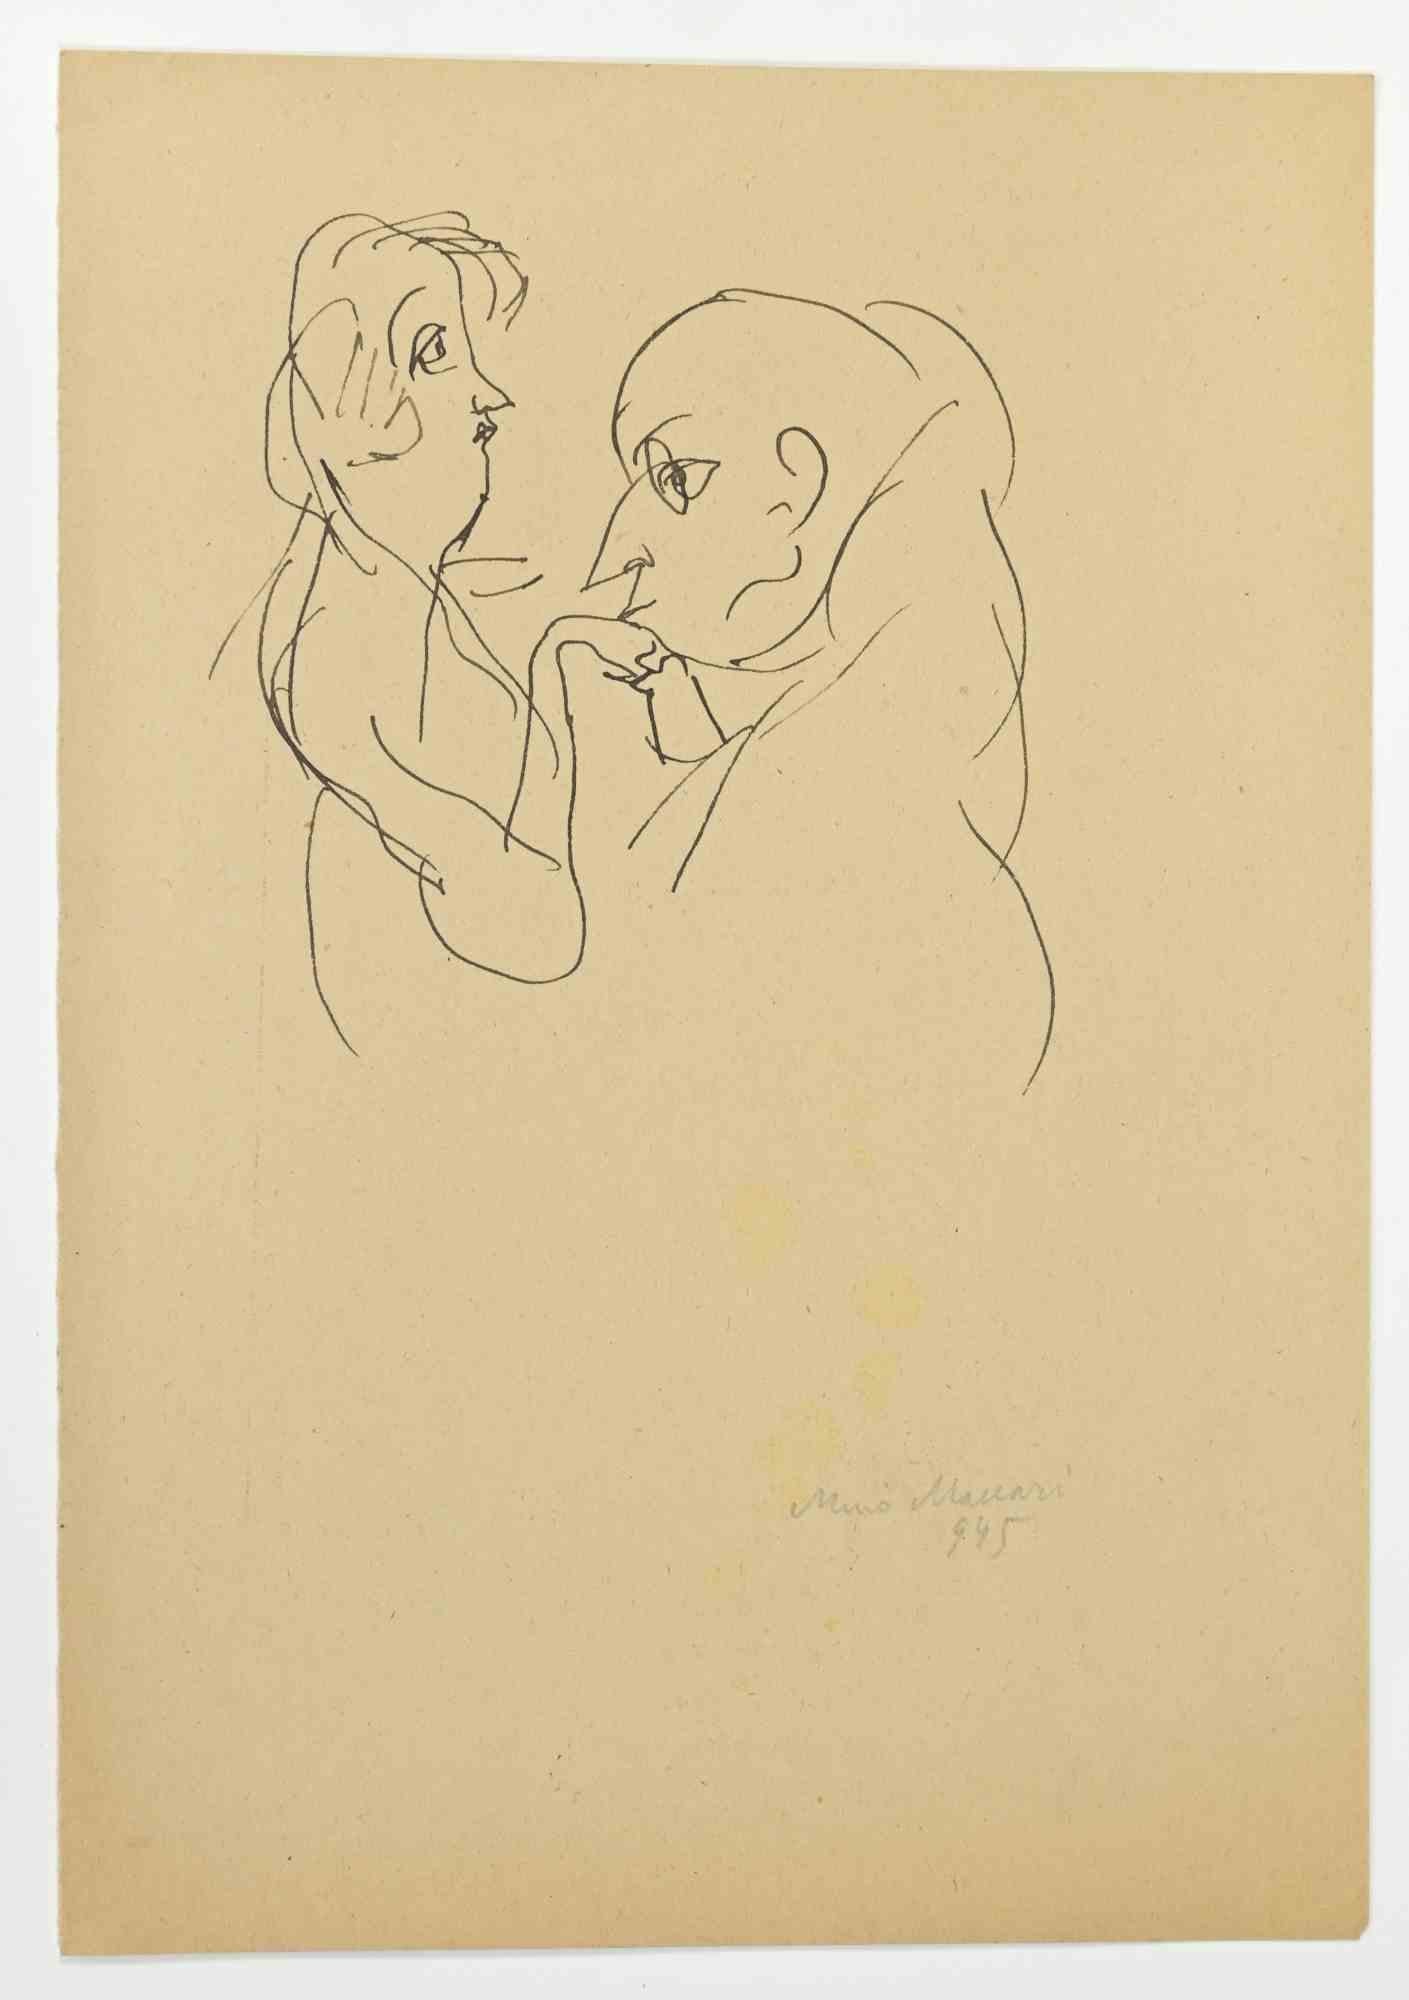 The Kiss is a China Ink Drawing realized by Mino Maccari  (1924-1989) in 1945.

Hand-signed on the lower.

Good condition.

Mino Maccari (Siena, 1924-Rome, June 16, 1989) was an Italian writer, painter, engraver and journalist, winner of the